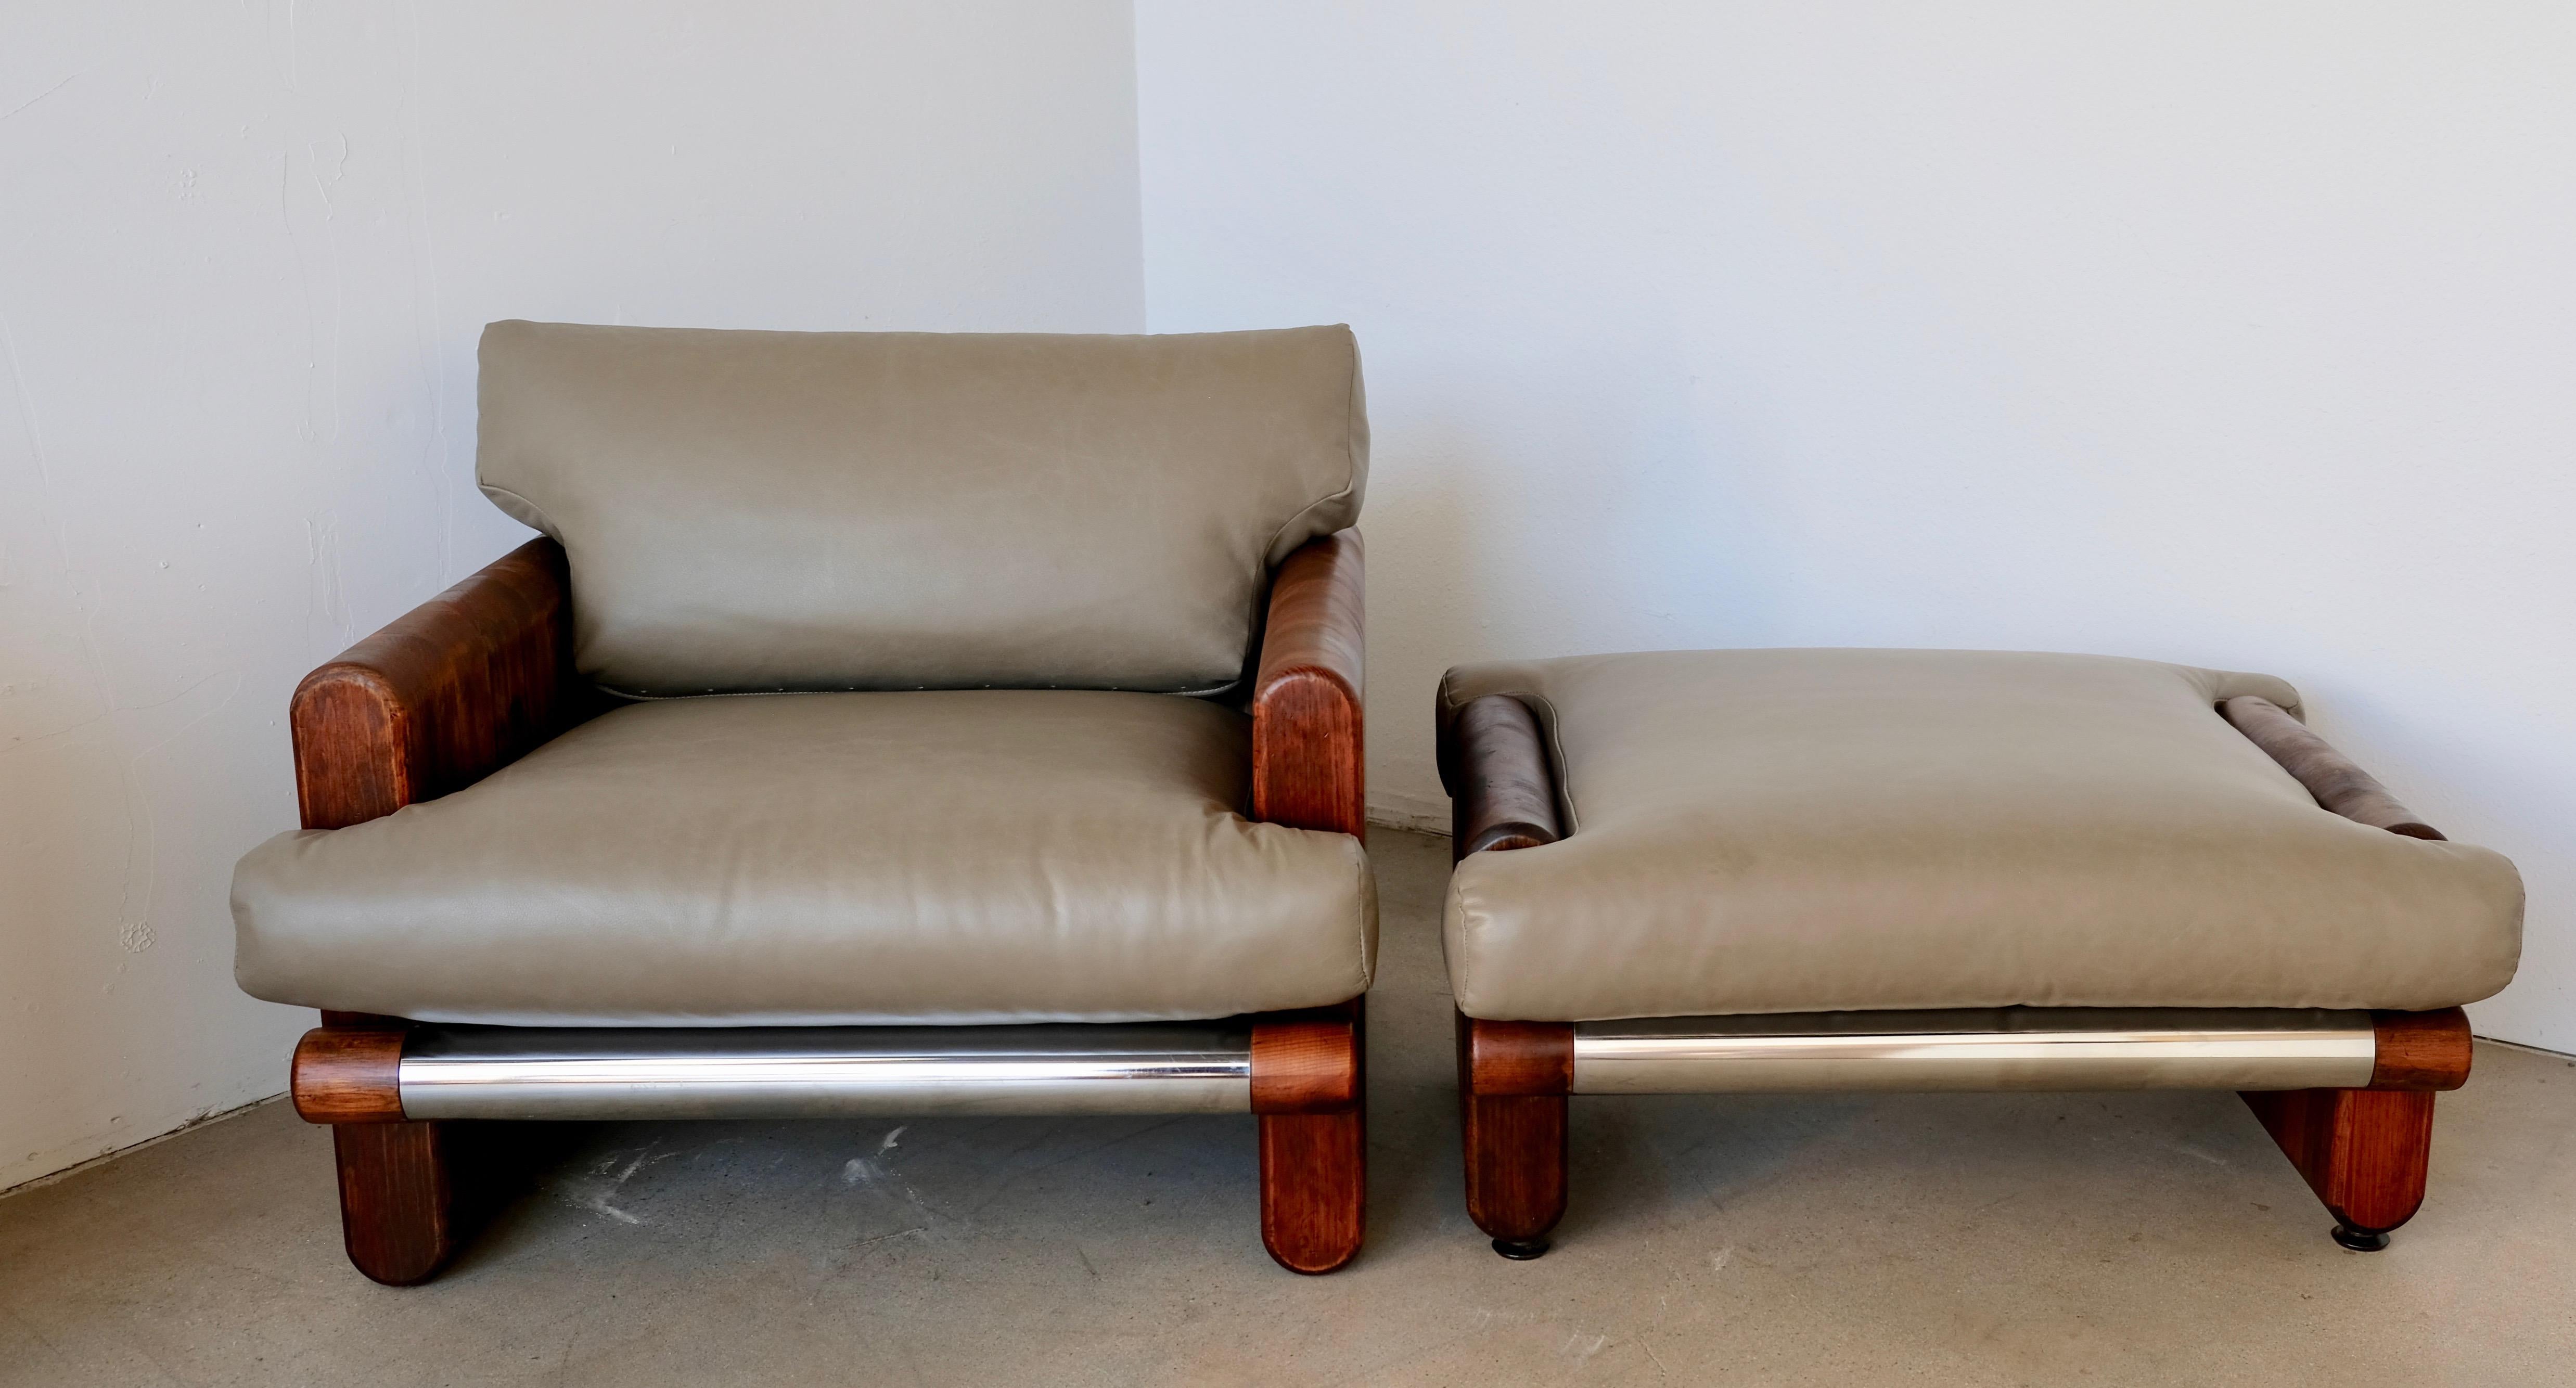 American Made in California Wood and Leather Lounge Chair and Ottoman by John Caldwell